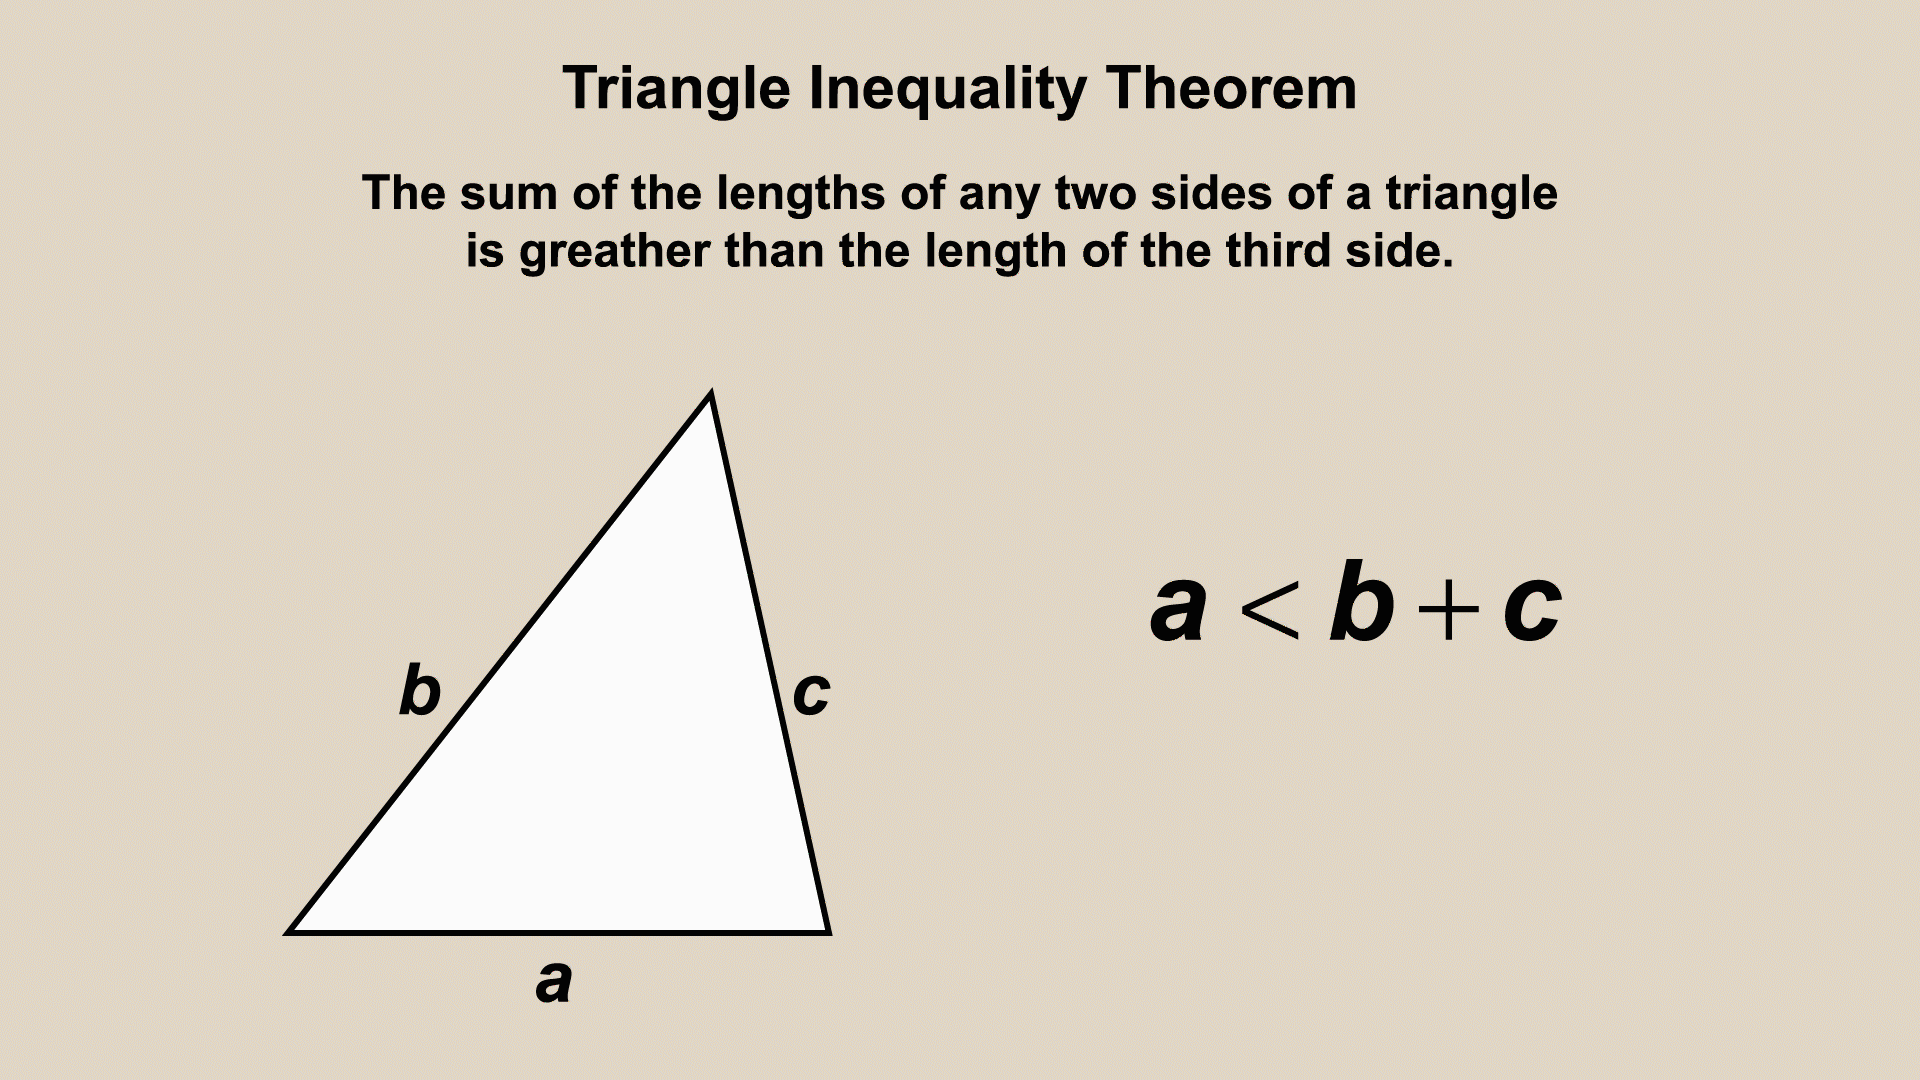 This piece of animated math clip art shows the Triangle Inequality Theorem.